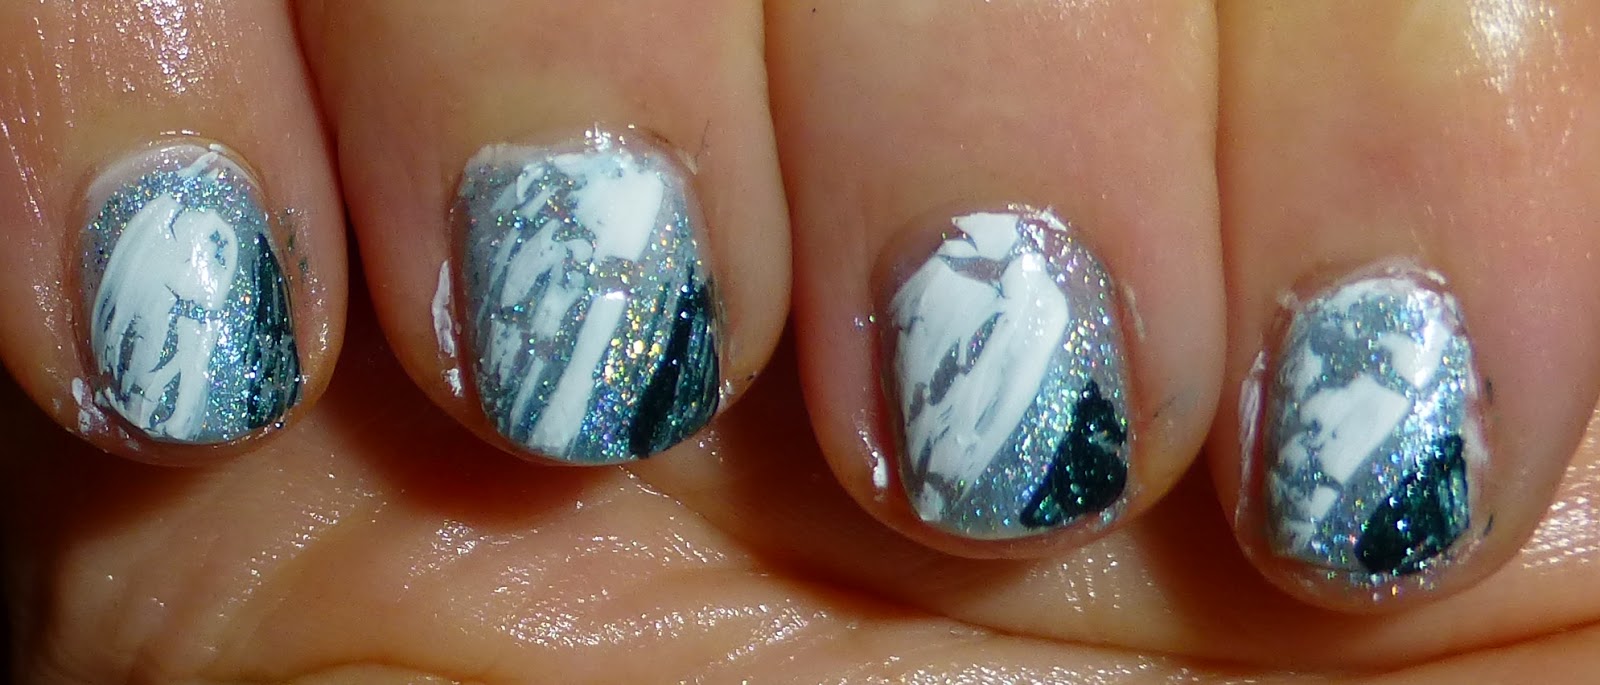 IndieAna- In Search of the HolyGrail: Holo-riffic Nails